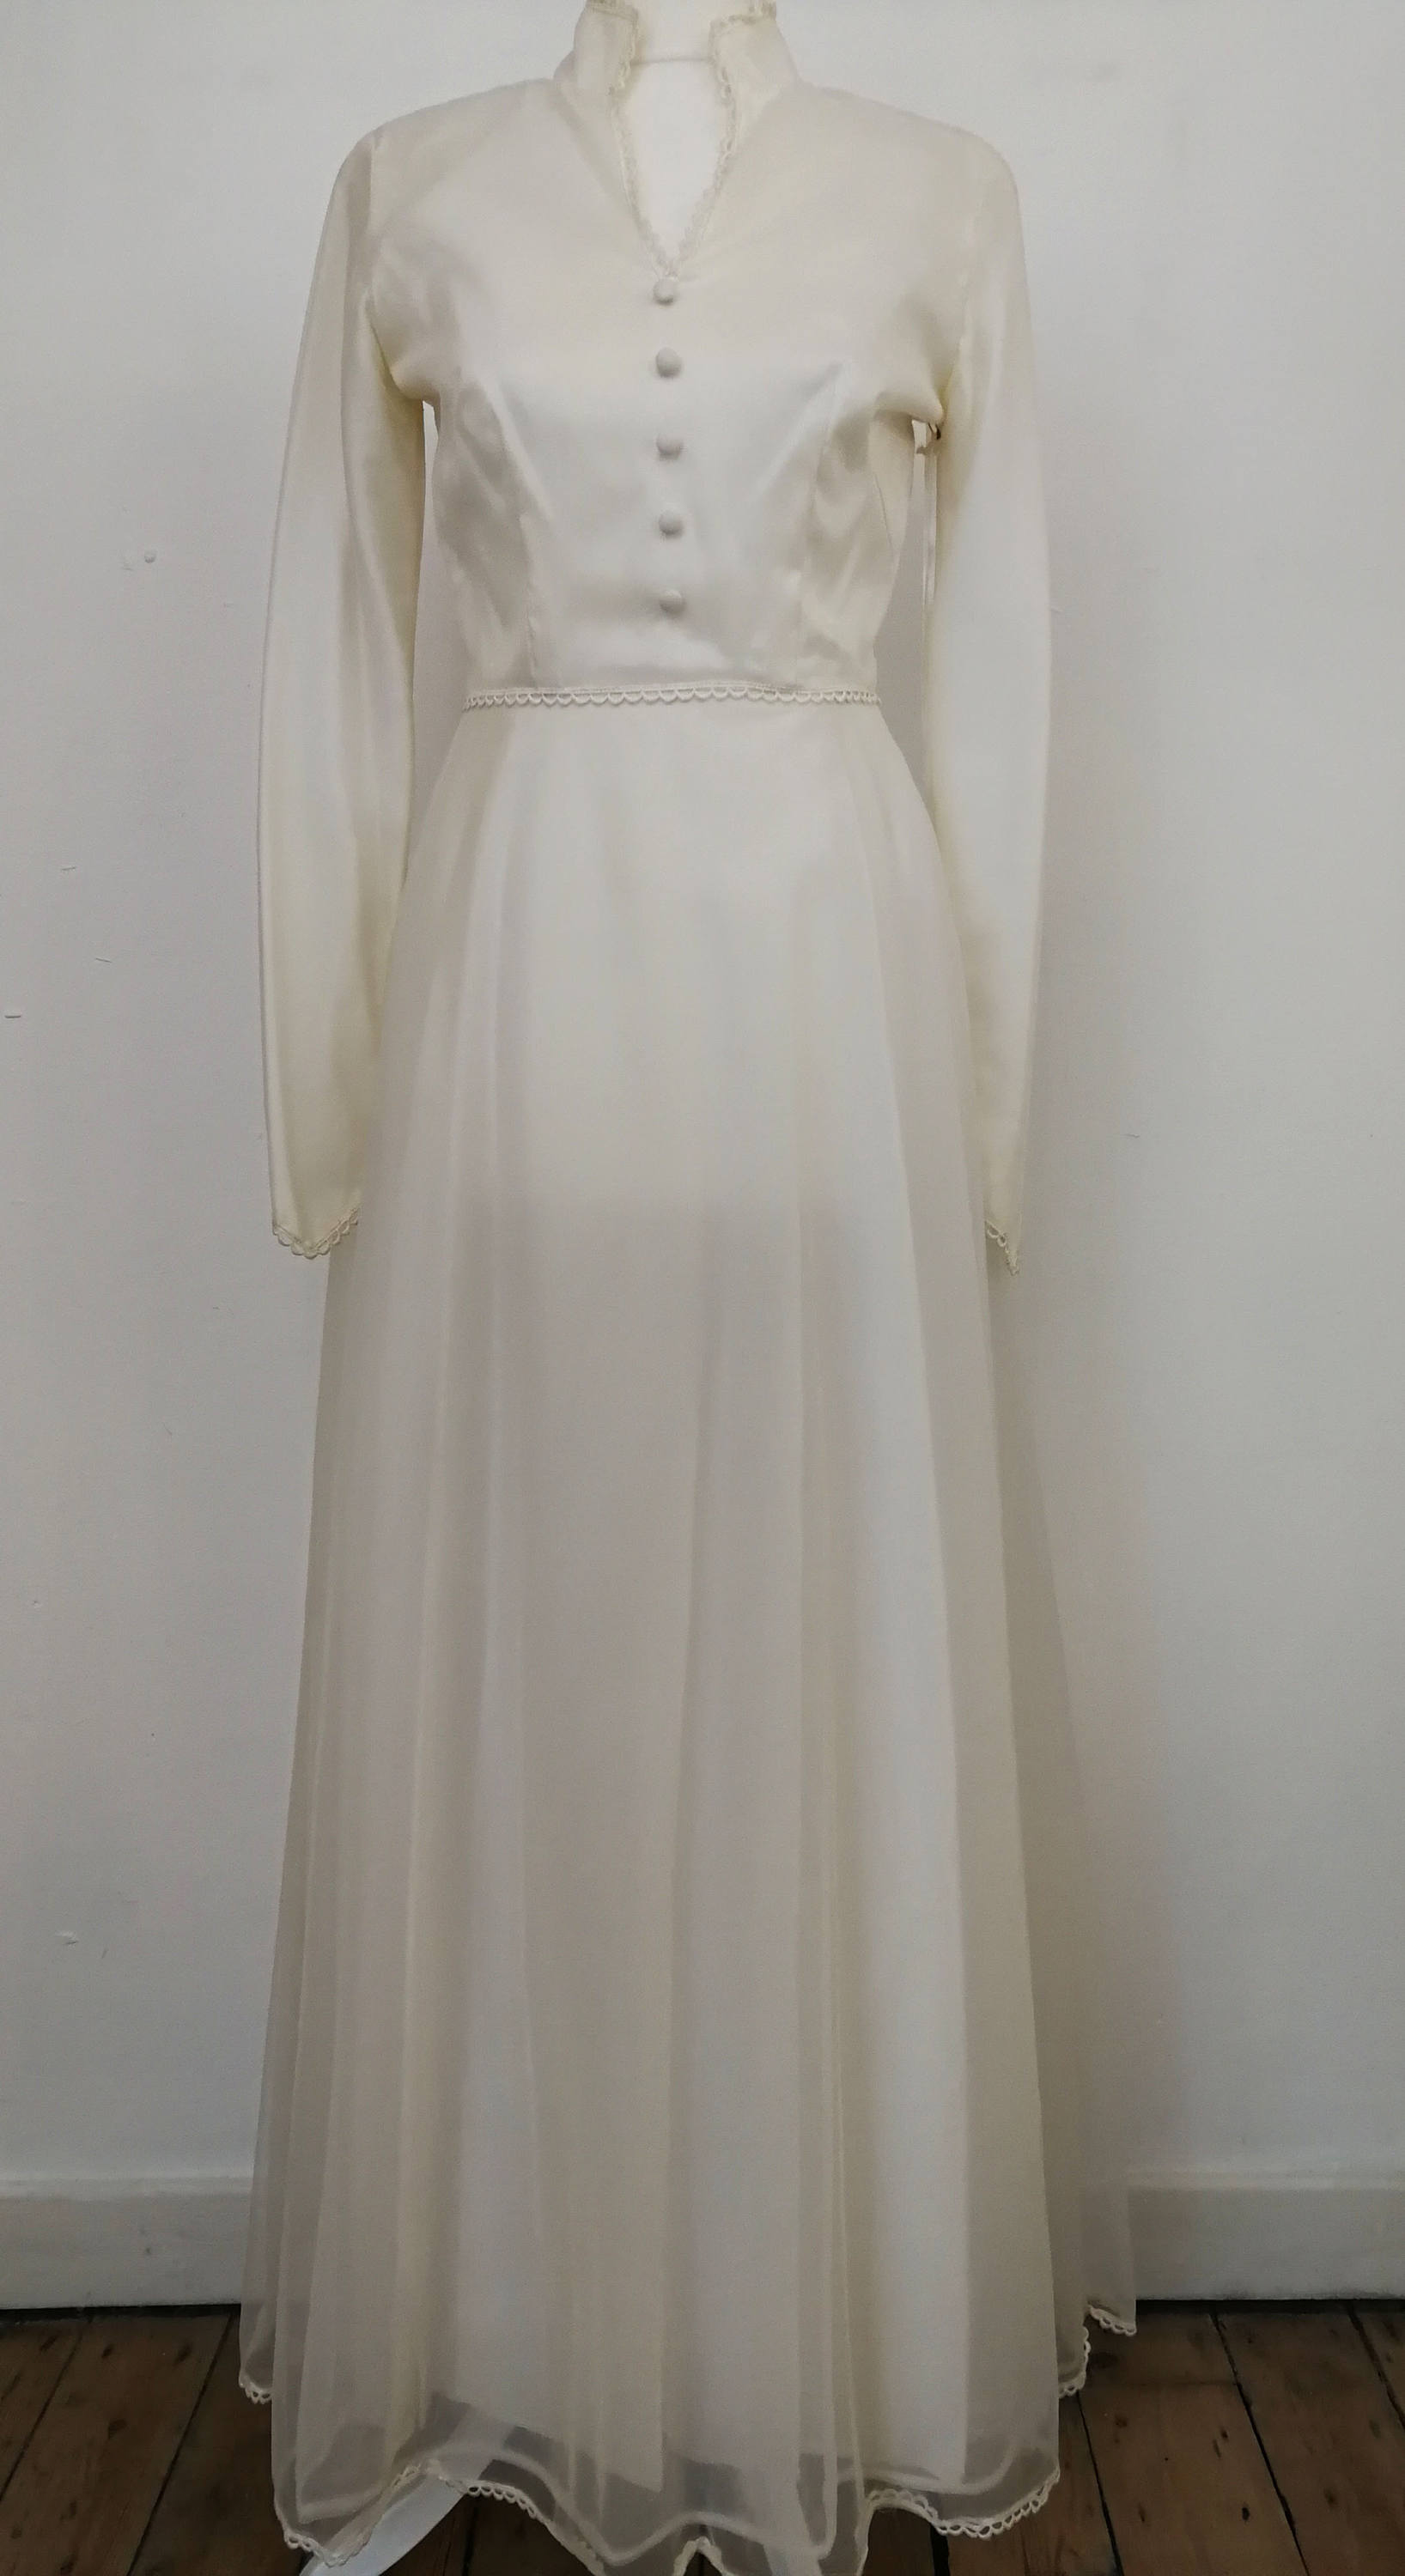  Charlotte  Vintage  Wedding  Dress  in Ivory Cream with Long